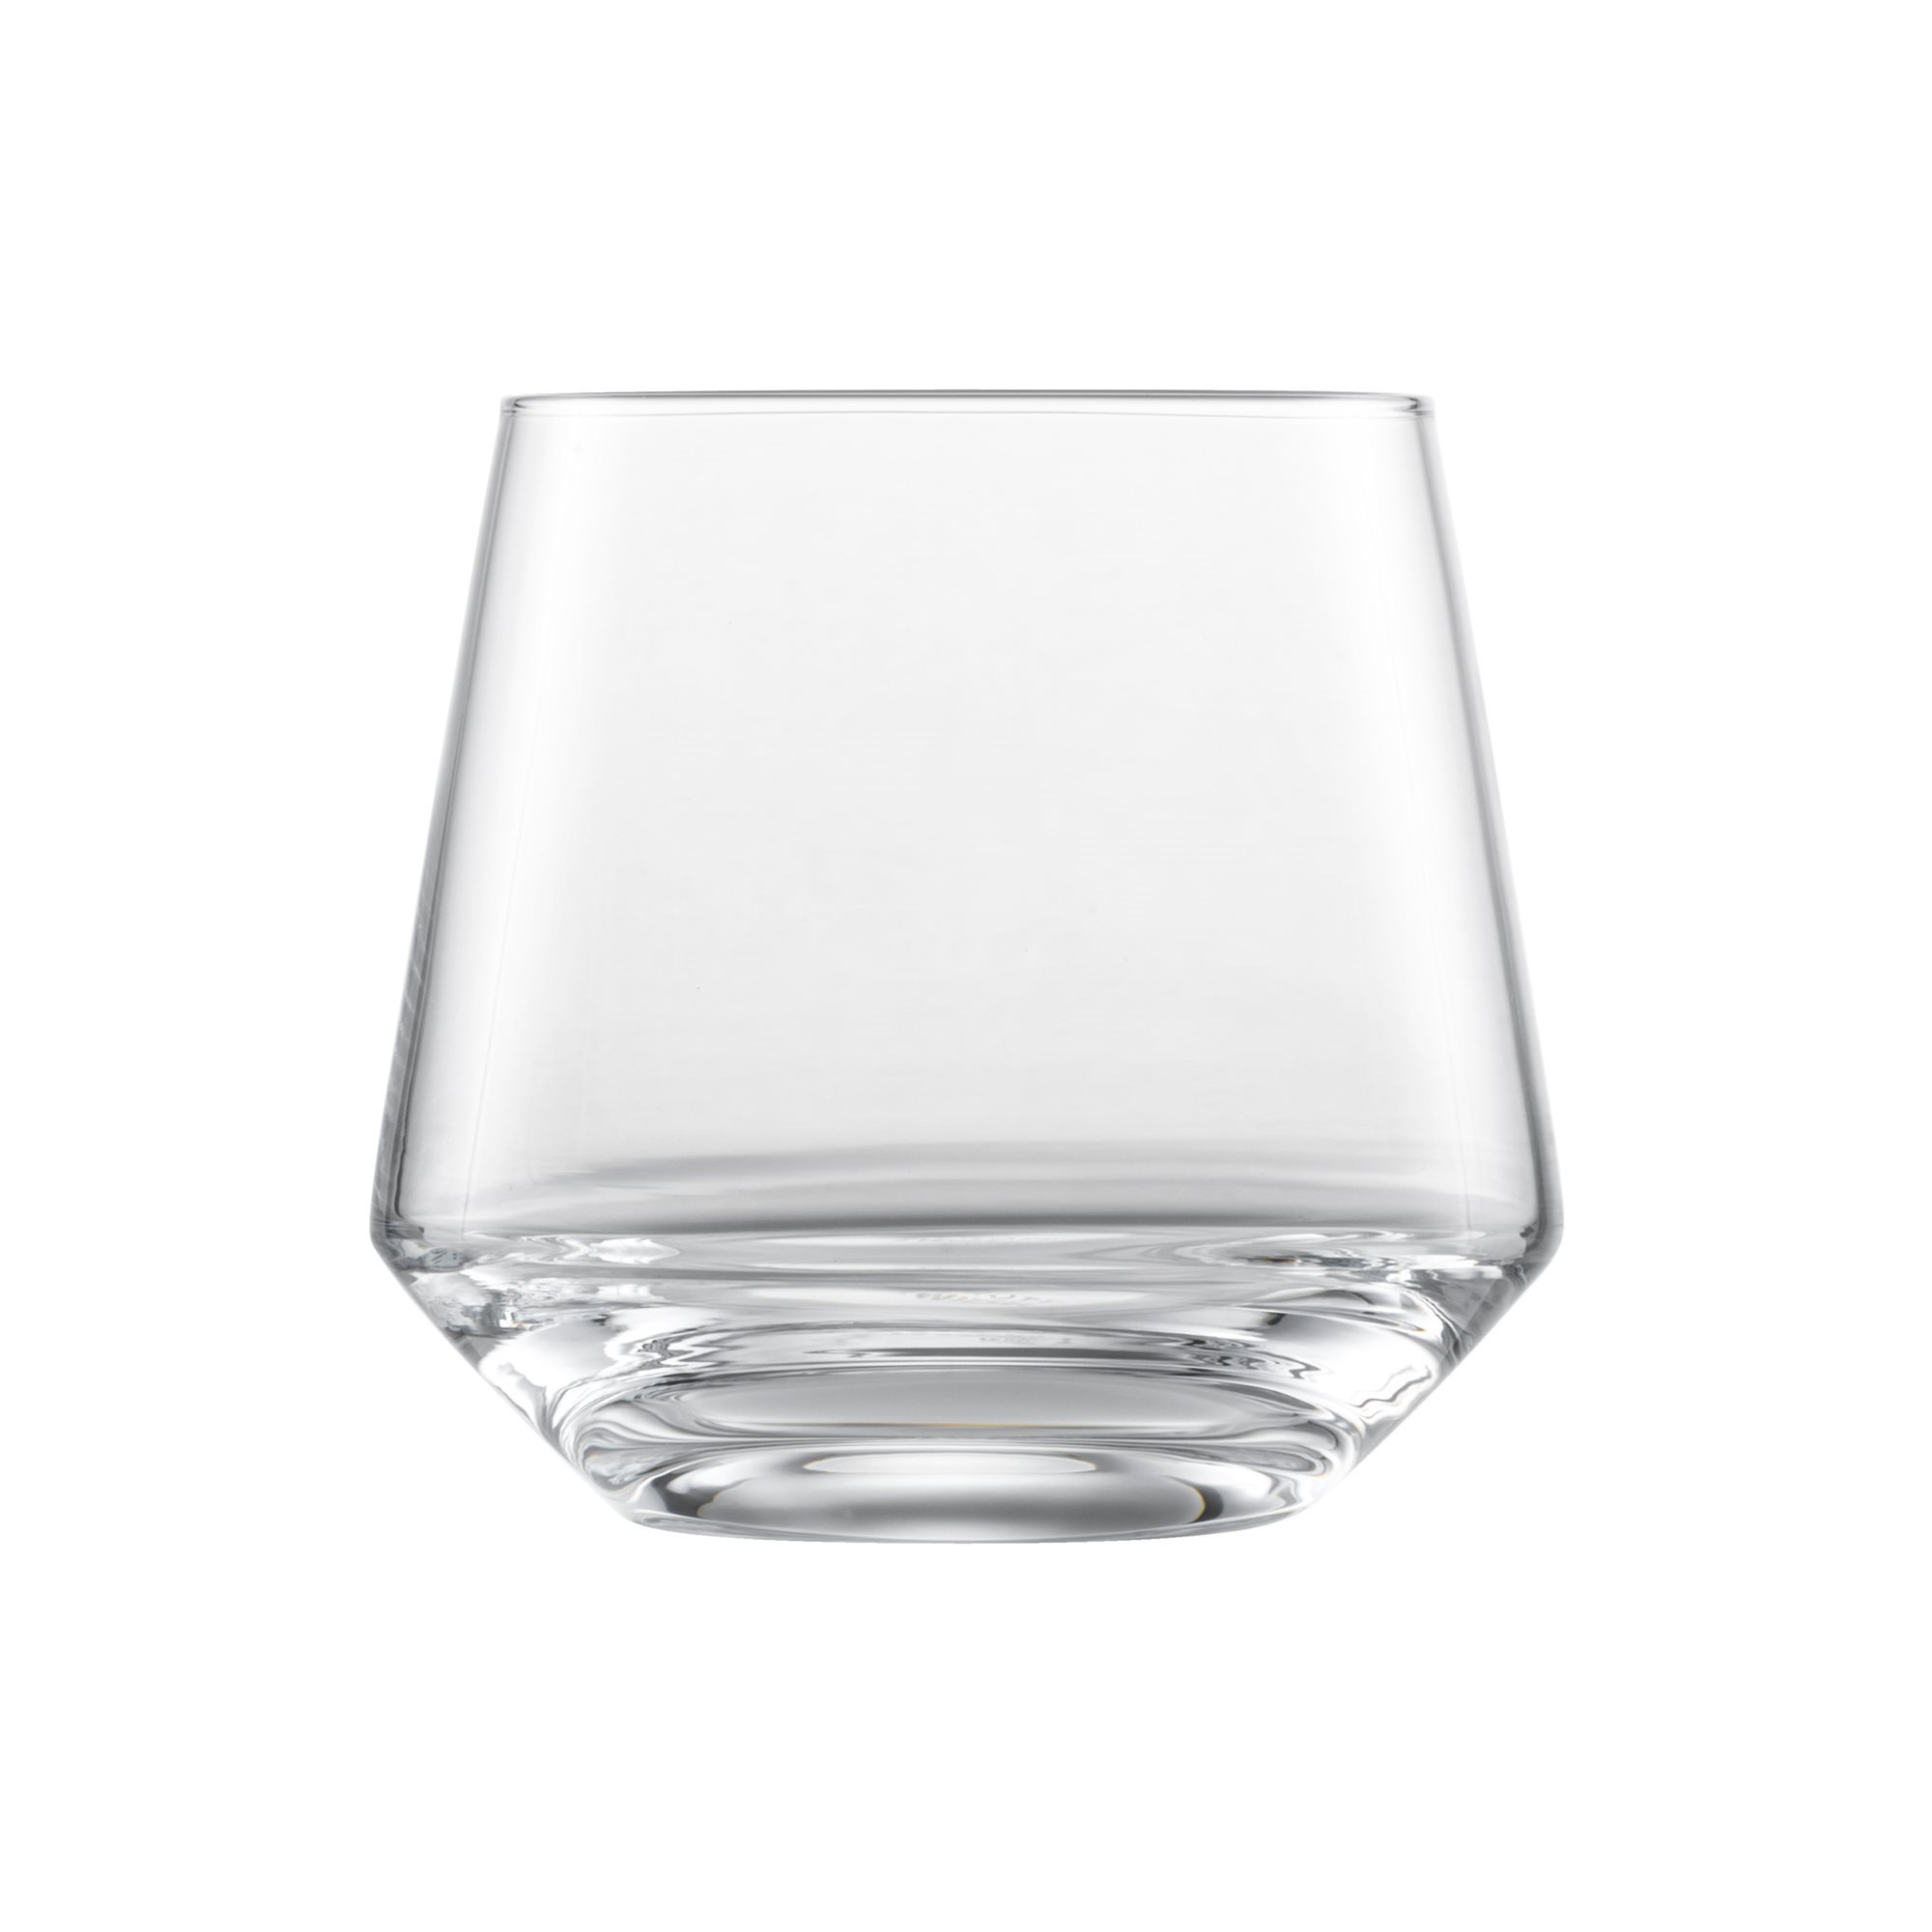 ZWIESEL GLAS Whiskey Ice Mold Gift Set